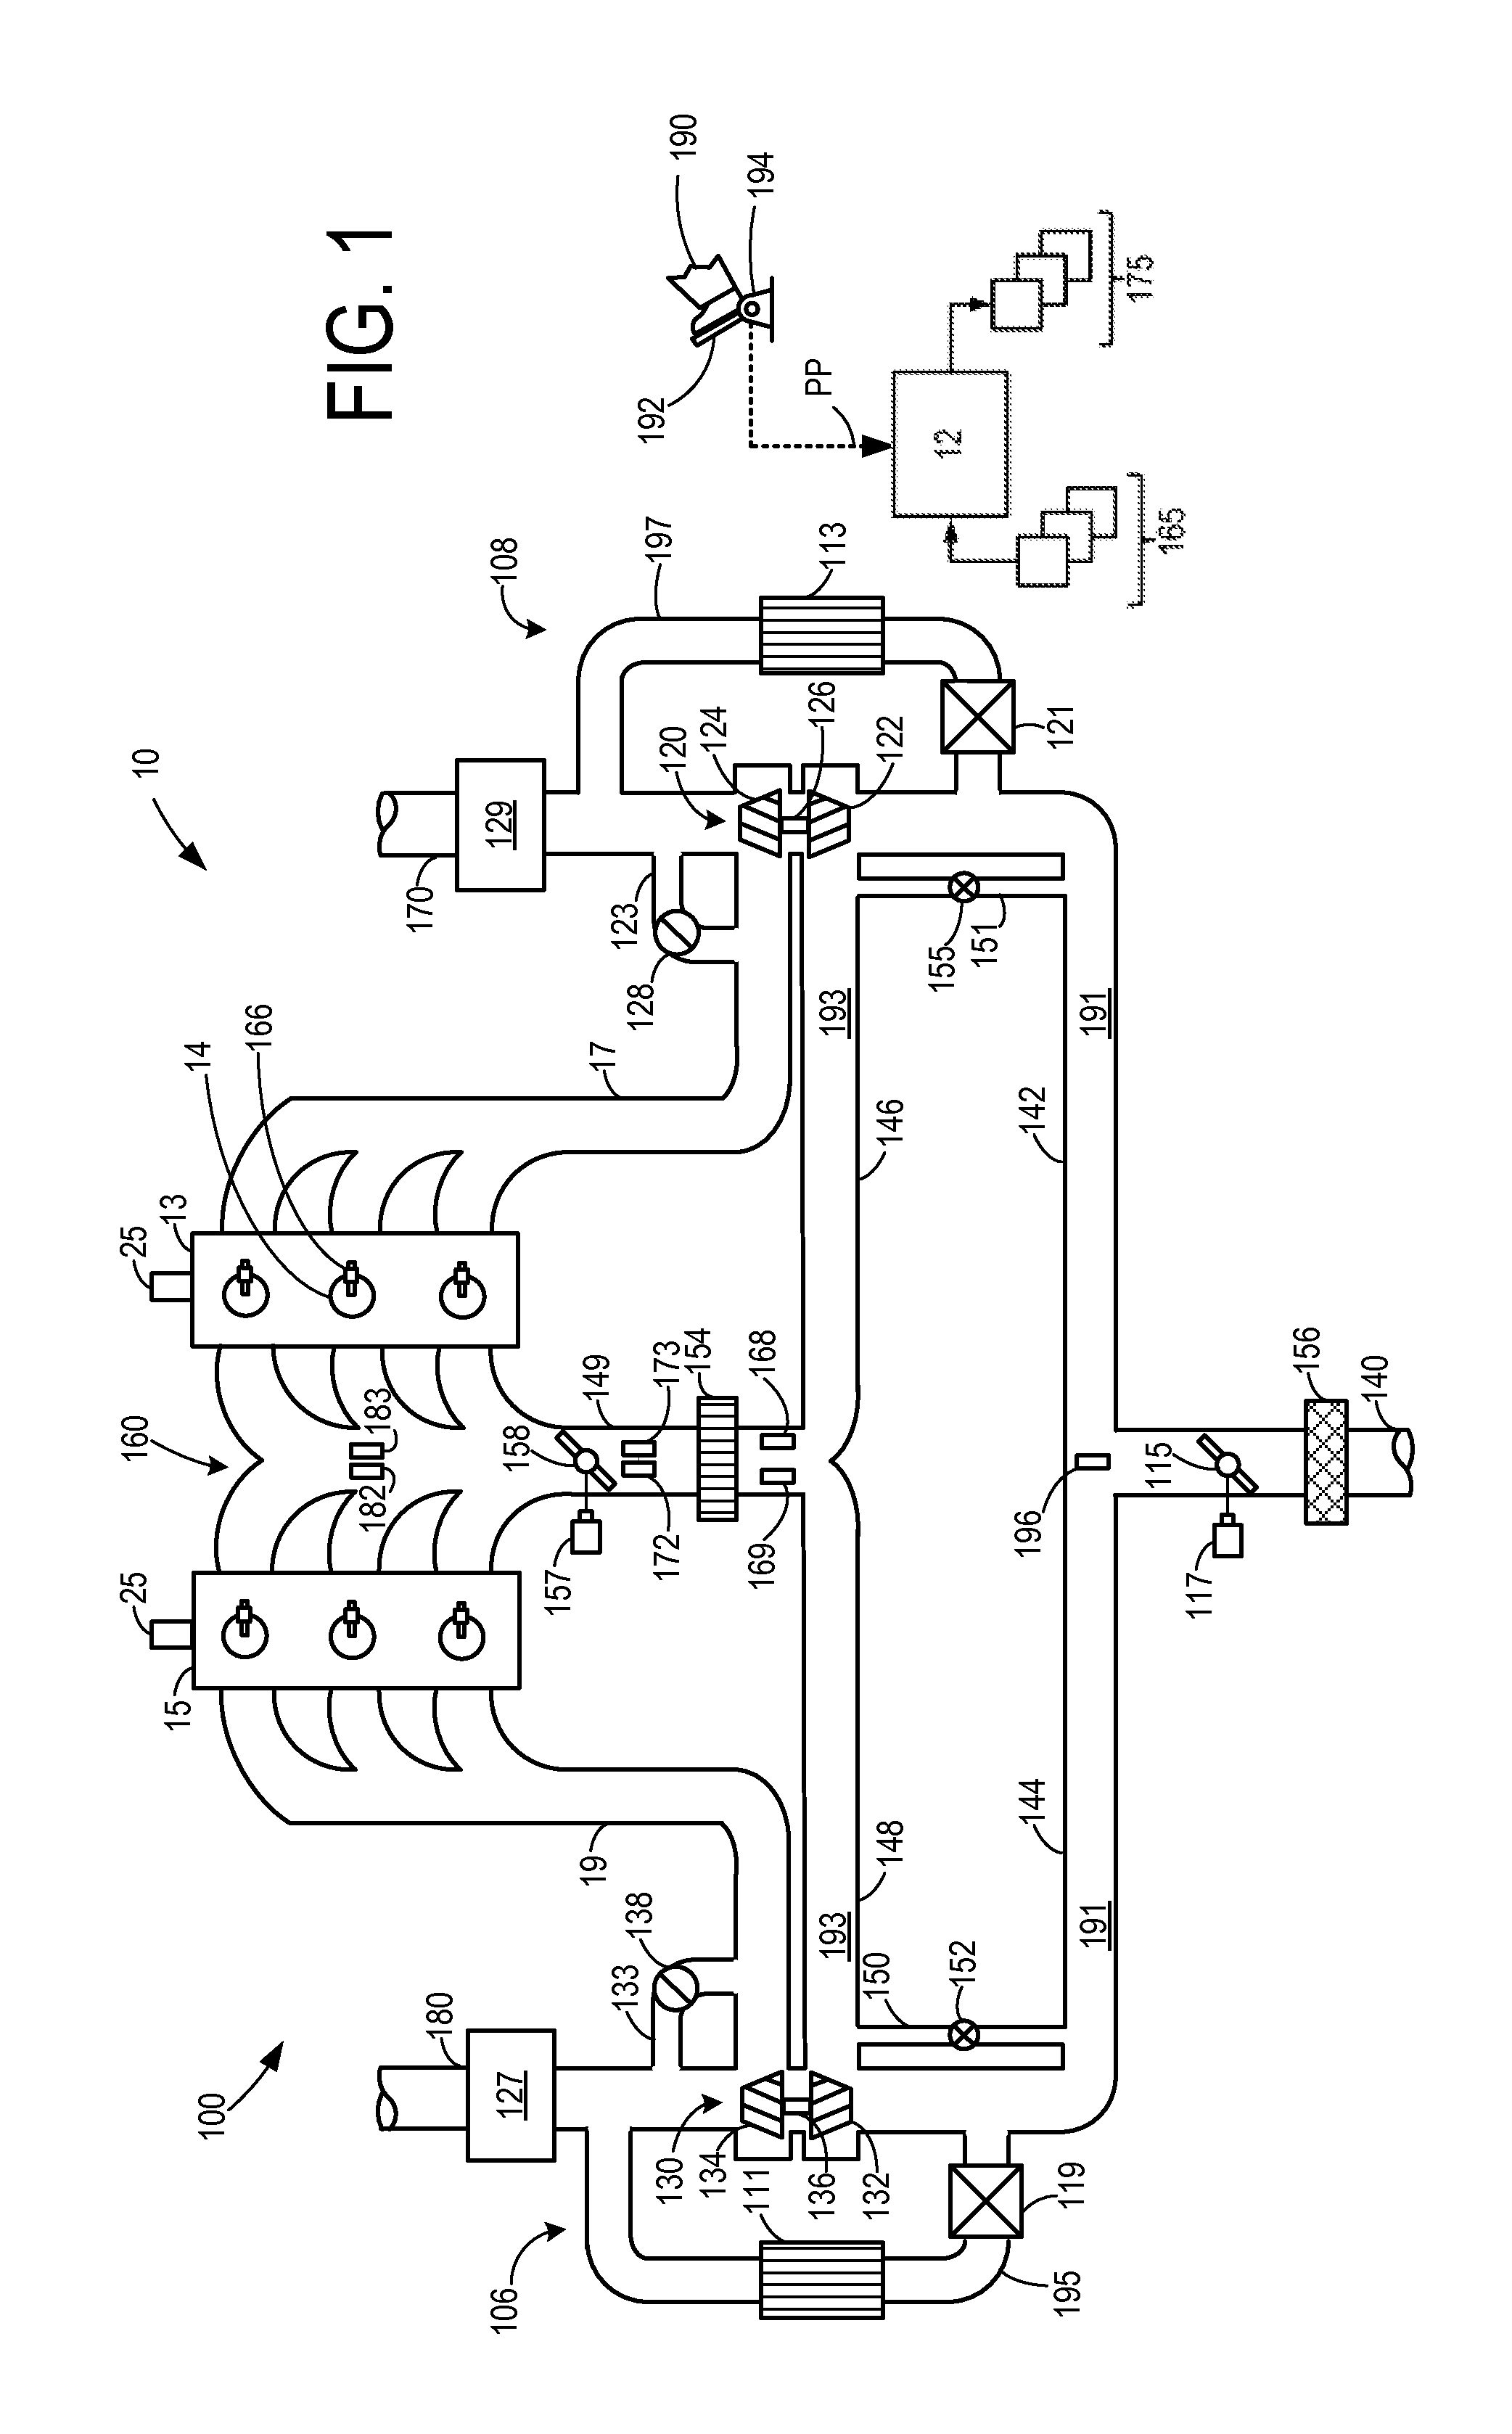 Low-pressure egr control during compressor bypass valve operation